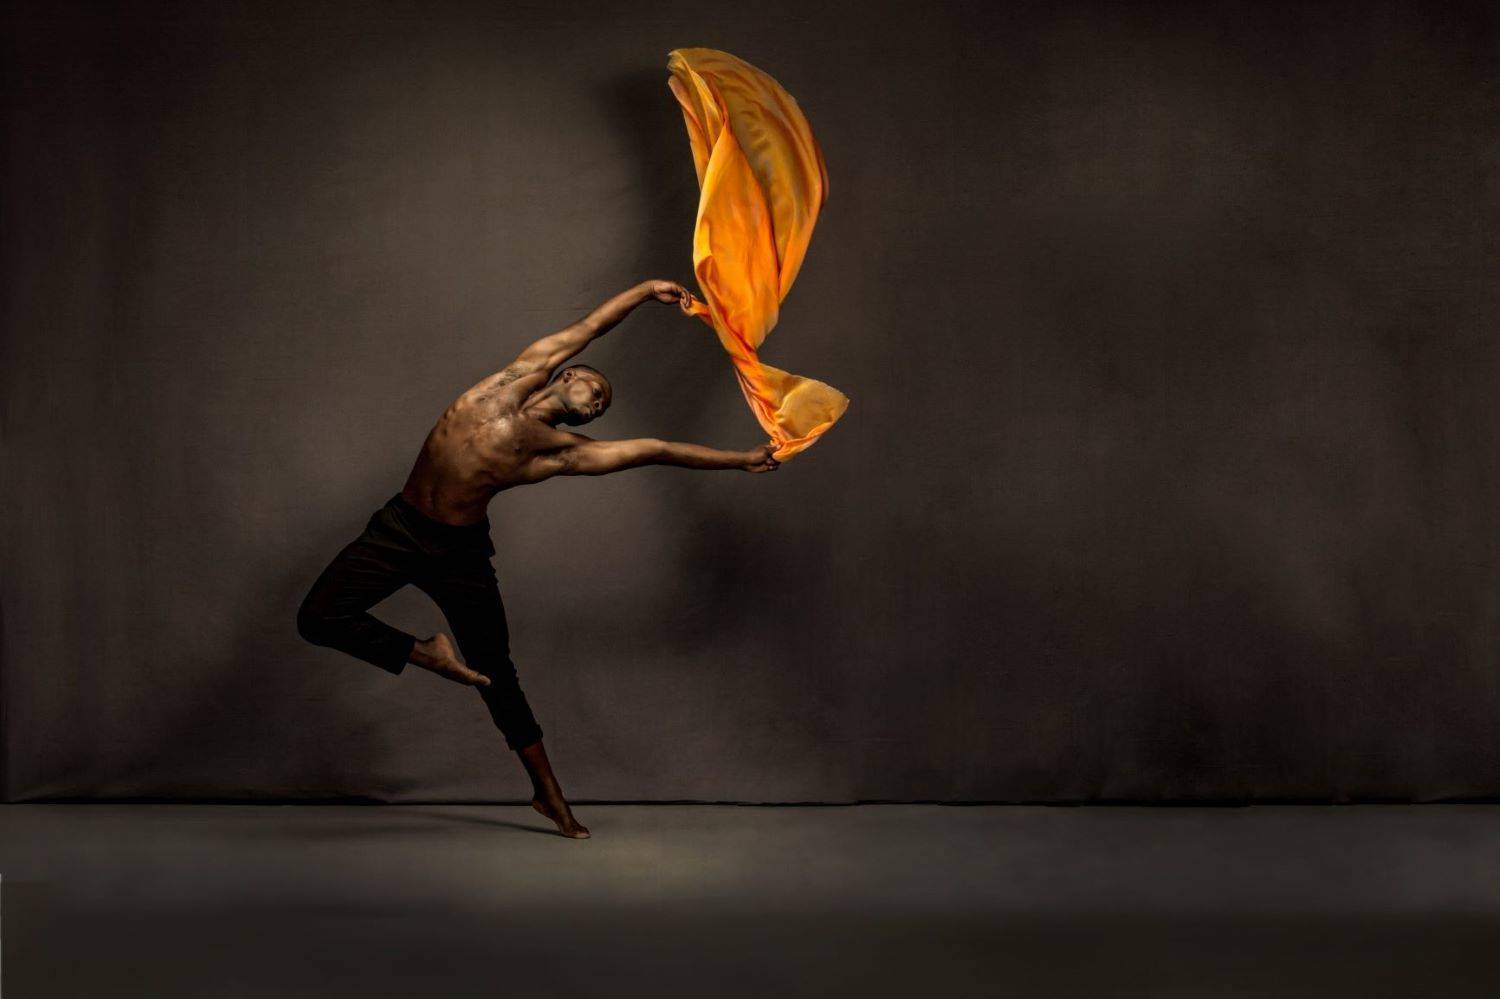 Caption: South Chicago Dance Theatre. Photo credit: Thomas Mohr Photography. Description: ​Barefooted male dancer with a muscular physique and fitted black pants against a dark brown backdrop. His body is facing front, but his head and outstretched arms arc dramatically to the right. His lower torso, hips, and right leg above the knee arc to the left. He is grasping a bright orange scarf that appears to be in mid-air.